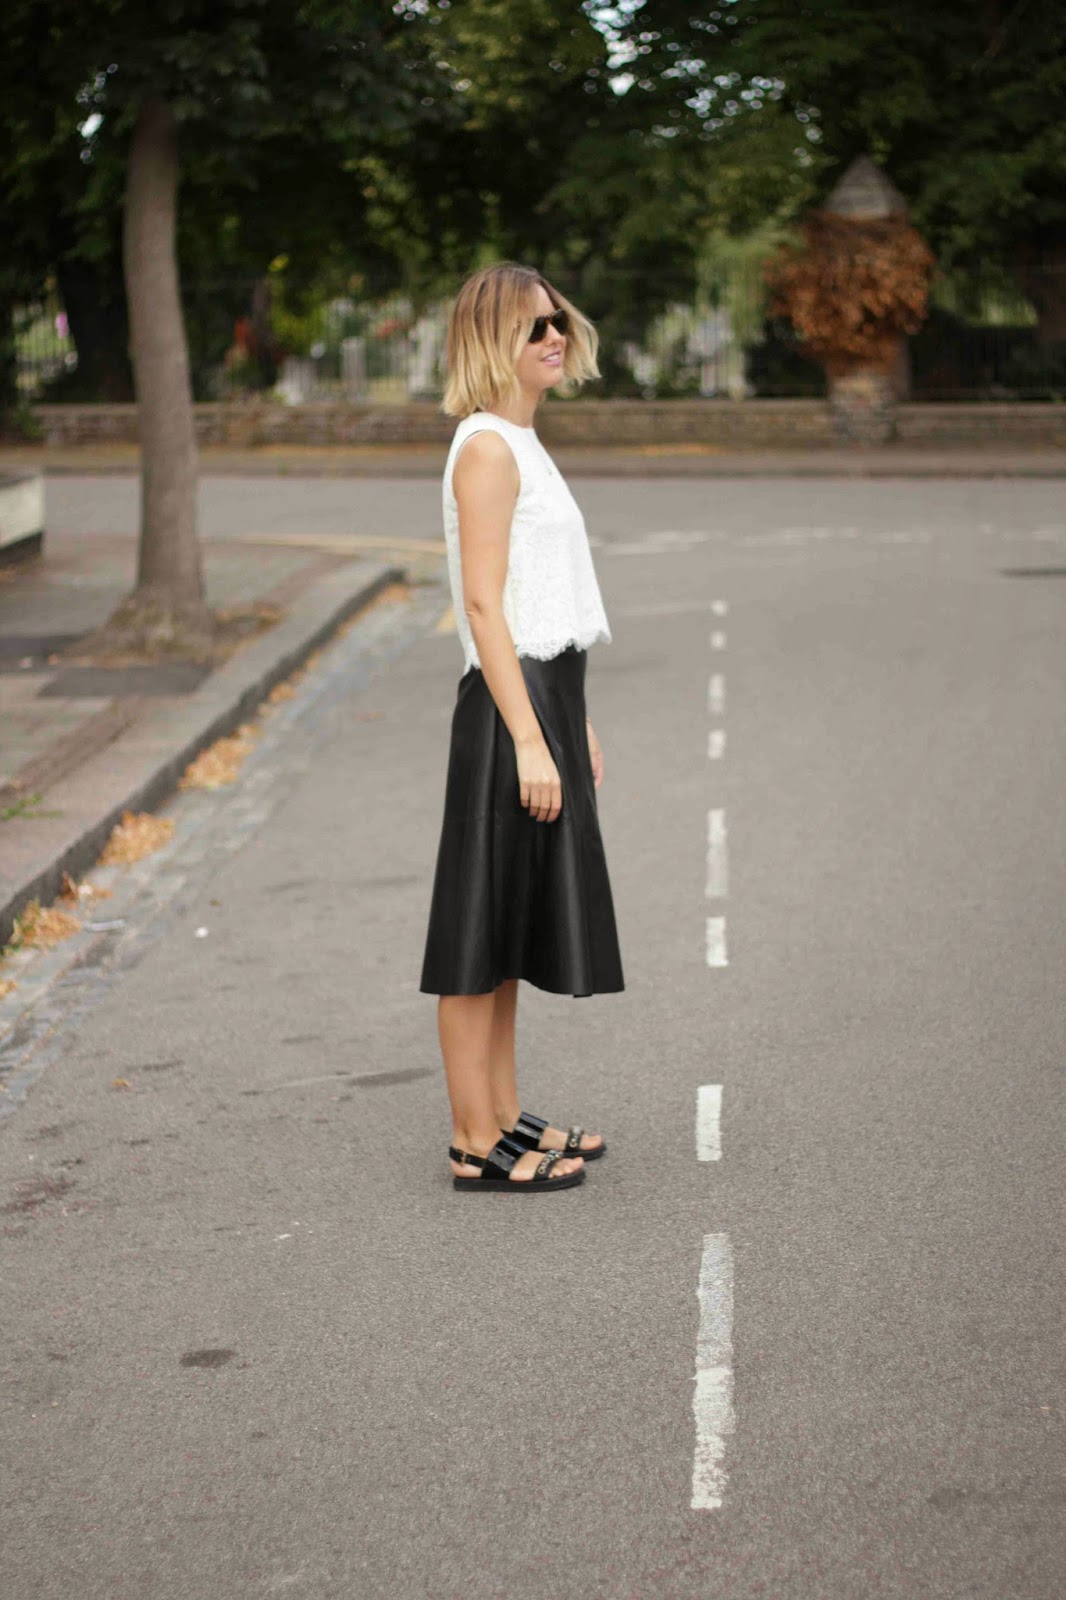 Frugal buy: Next faux leather skirt